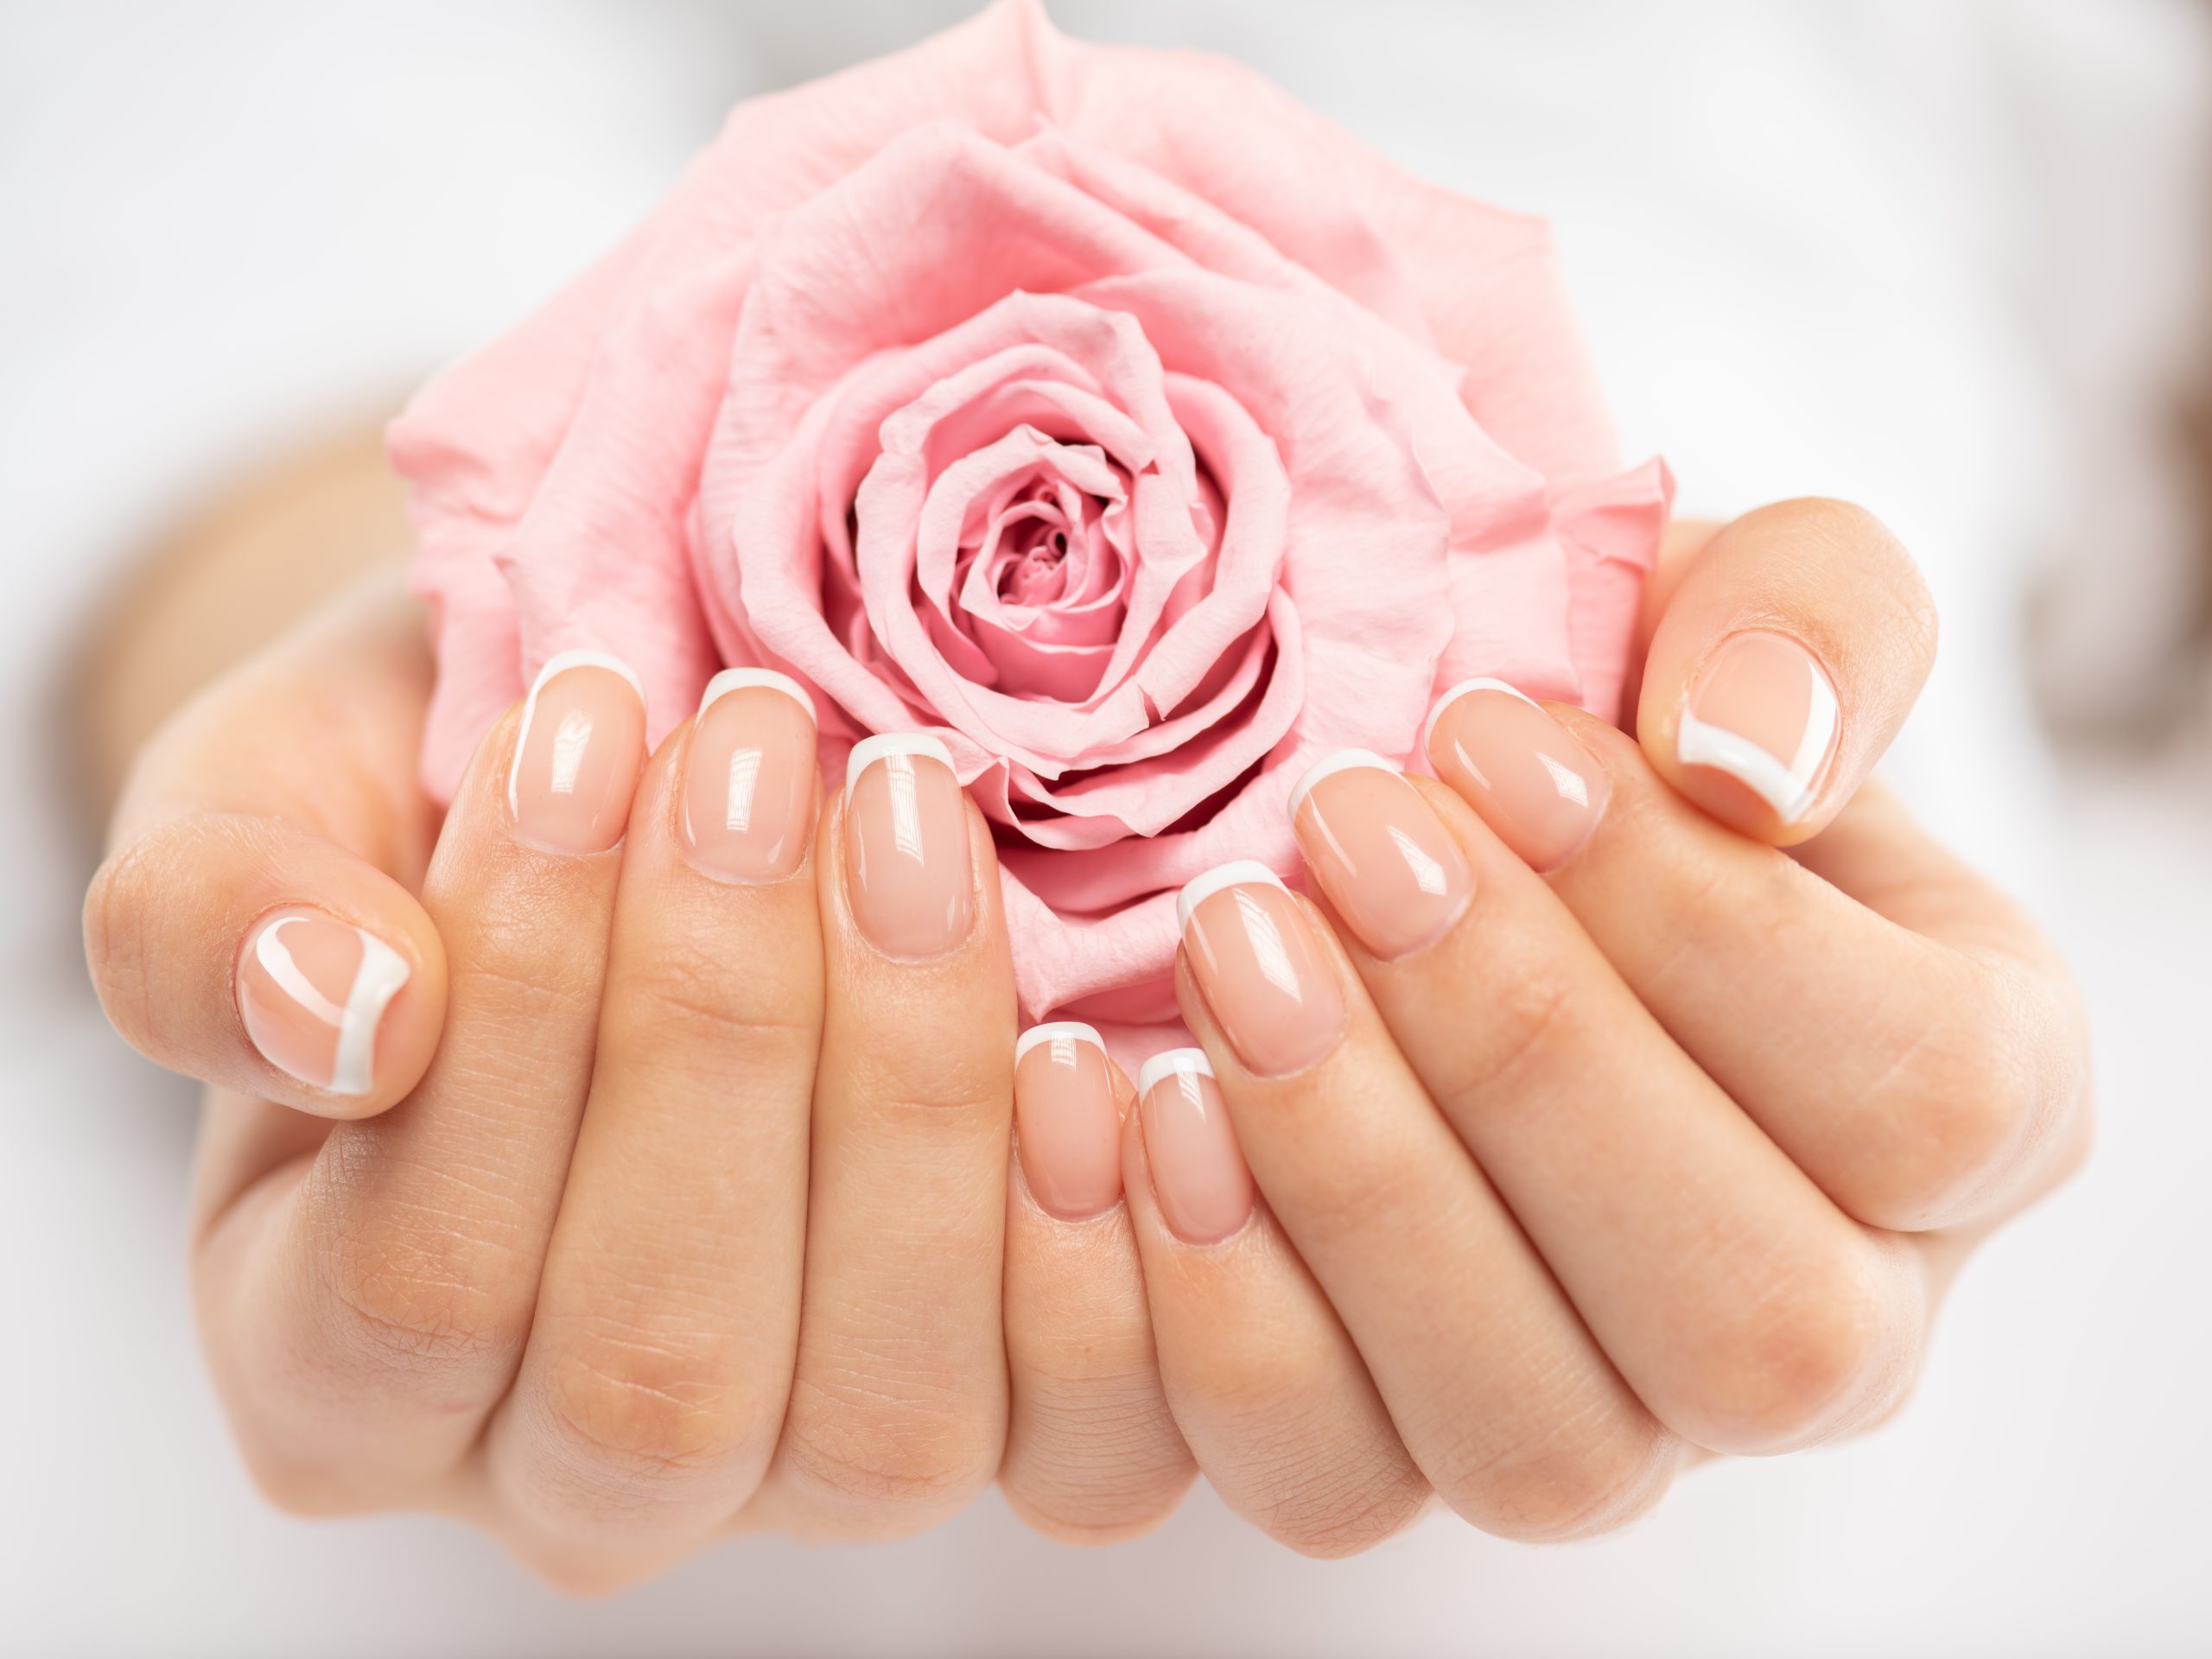 Woman gets manicure procedure in a spa salon. Beautiful female hands. Hand care. Woman cares for the nails on hands. Beauty treatment with skin of hand.   Woman's hands close-up view.